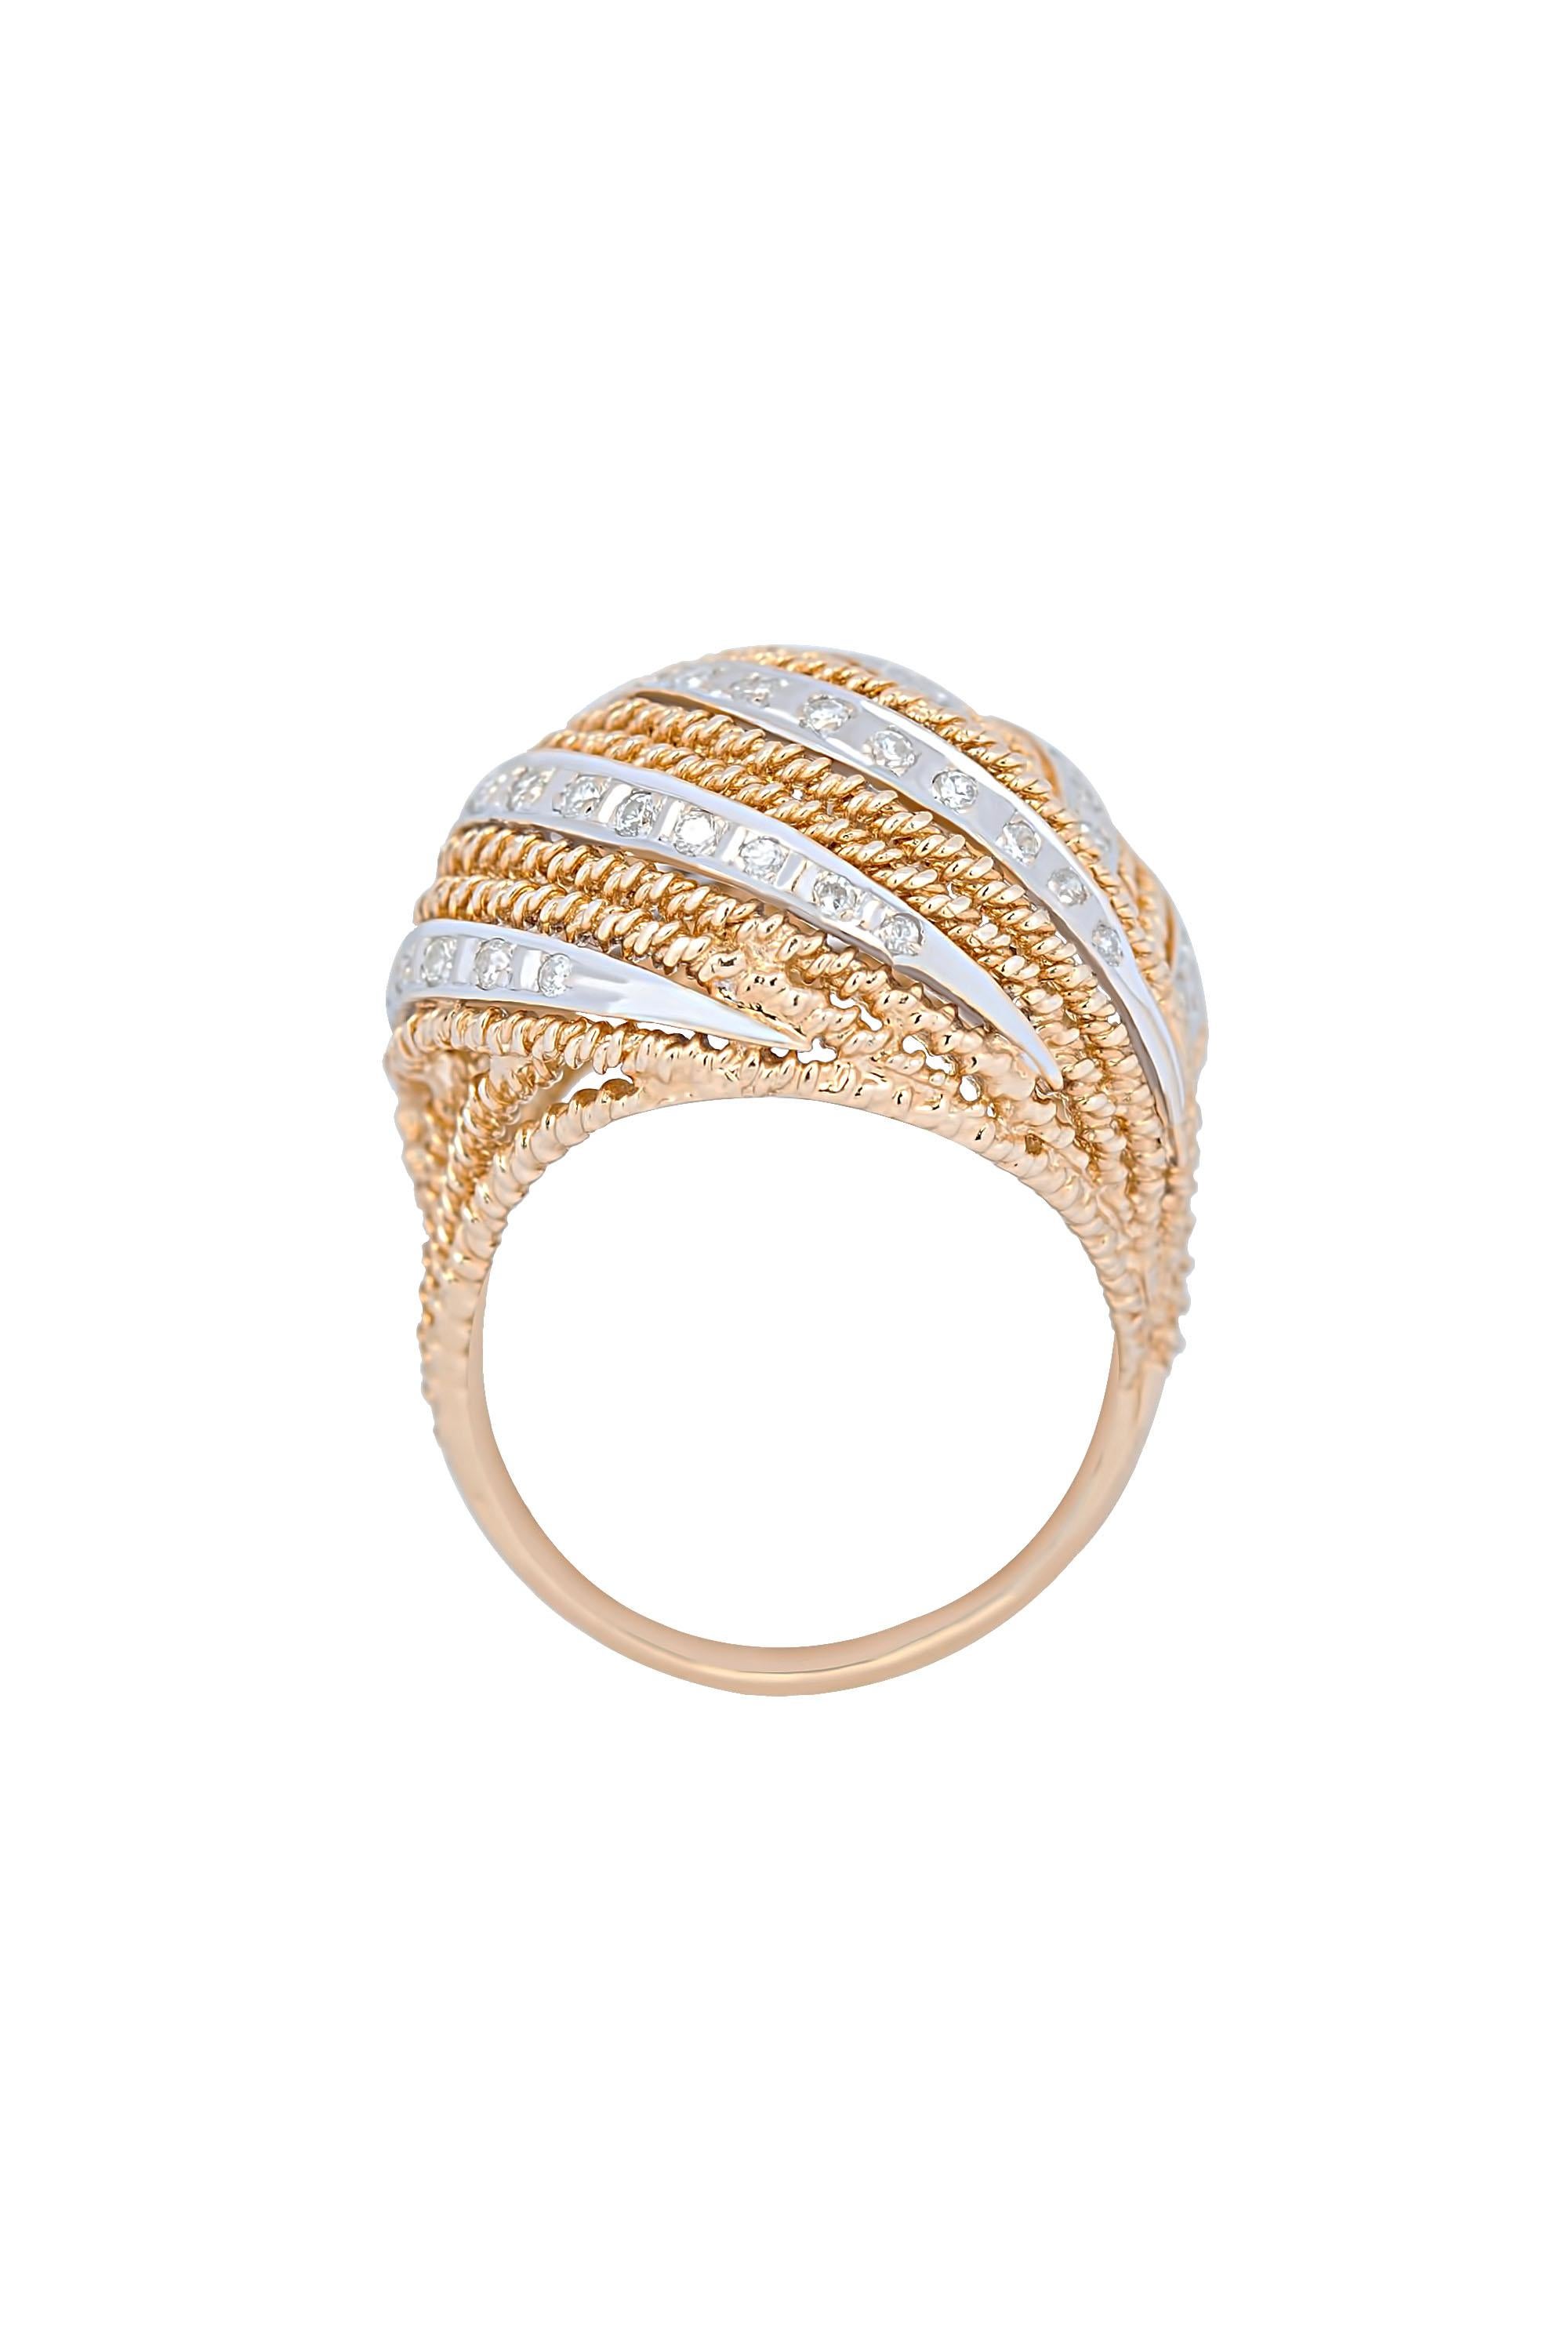 A refined classic, this vintage 14-karat yellow dome ring features a woven design of gold ropes alternating with curves of diamond-studded white gold. With an approximate total diamond weight of 1 carat. Currently a size 7 and may be resized.